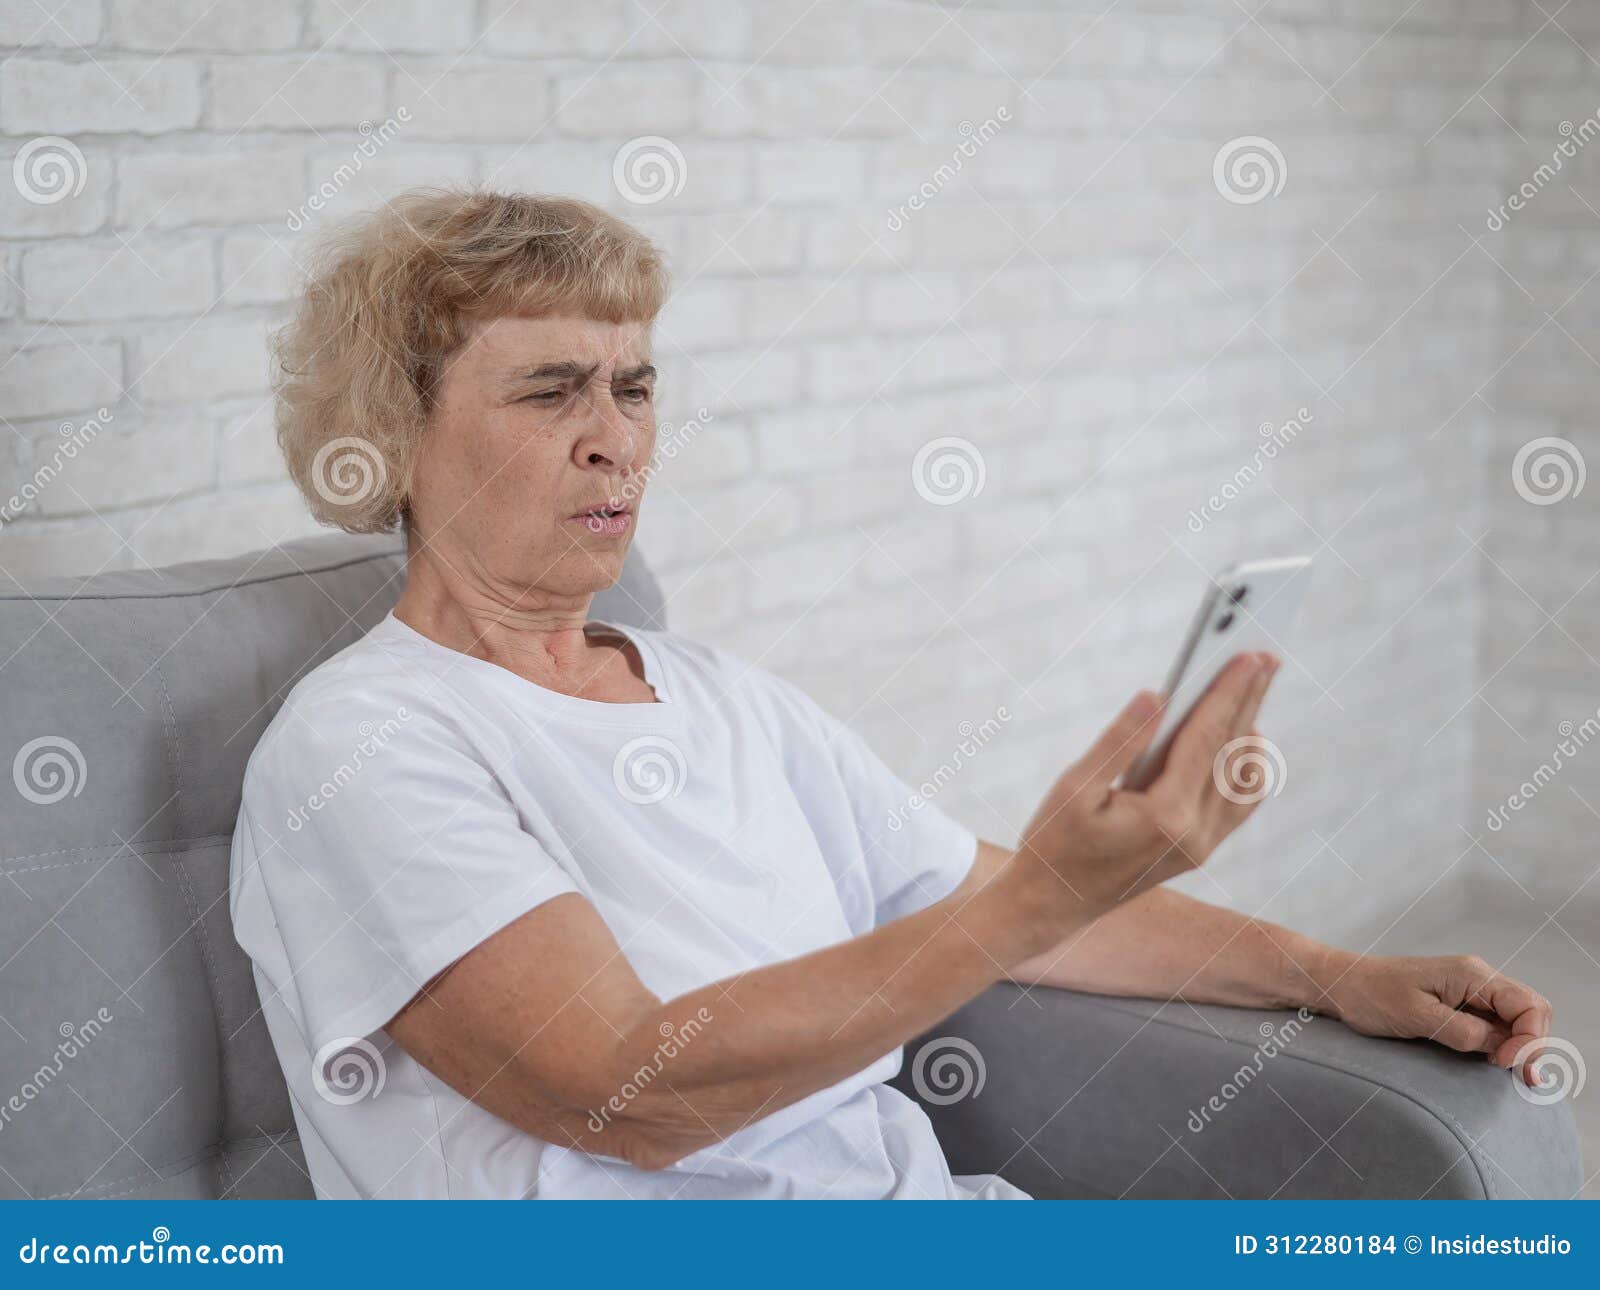 an elderly caucasian woman suffers from farsightedness and tries to read a message on a smartphone with her arm